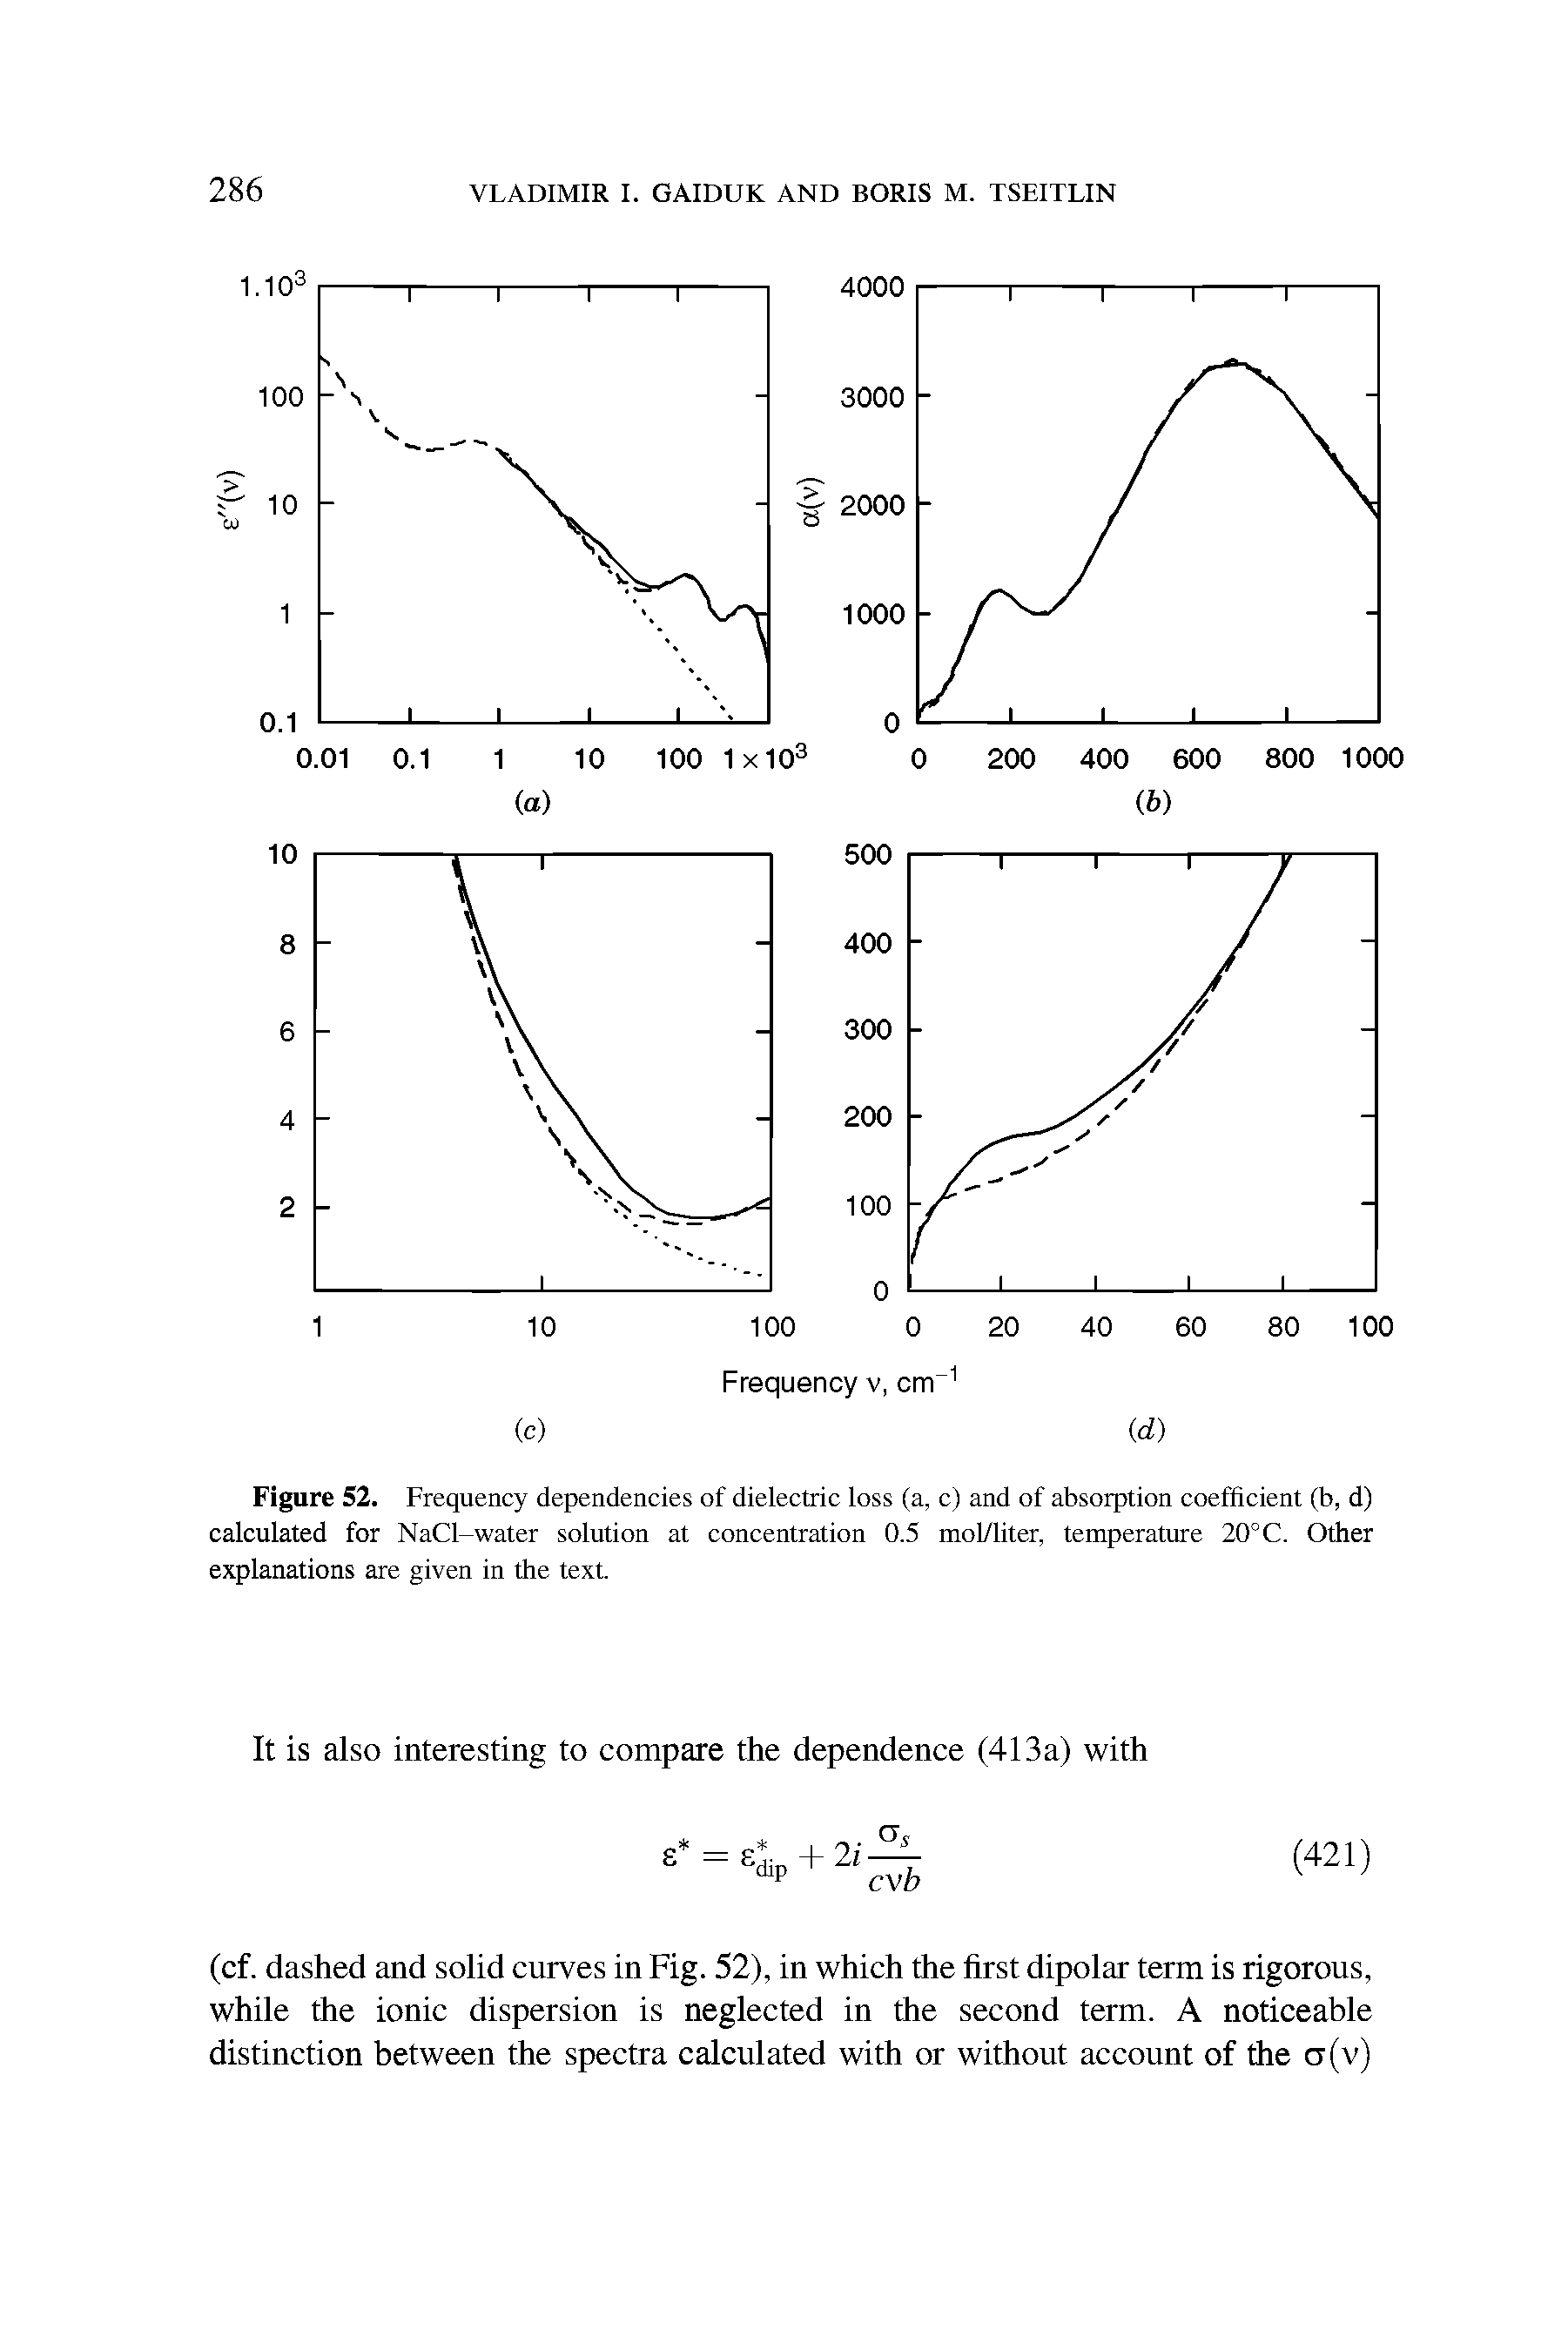 Figure 52. Frequency dependencies of dielectric loss (a, c) and of absorption coefficient (b, d) calculated for NaCl-water solution at concentration 0.5 mol/liter, temperature 20° C. Other explanations are given in the text.